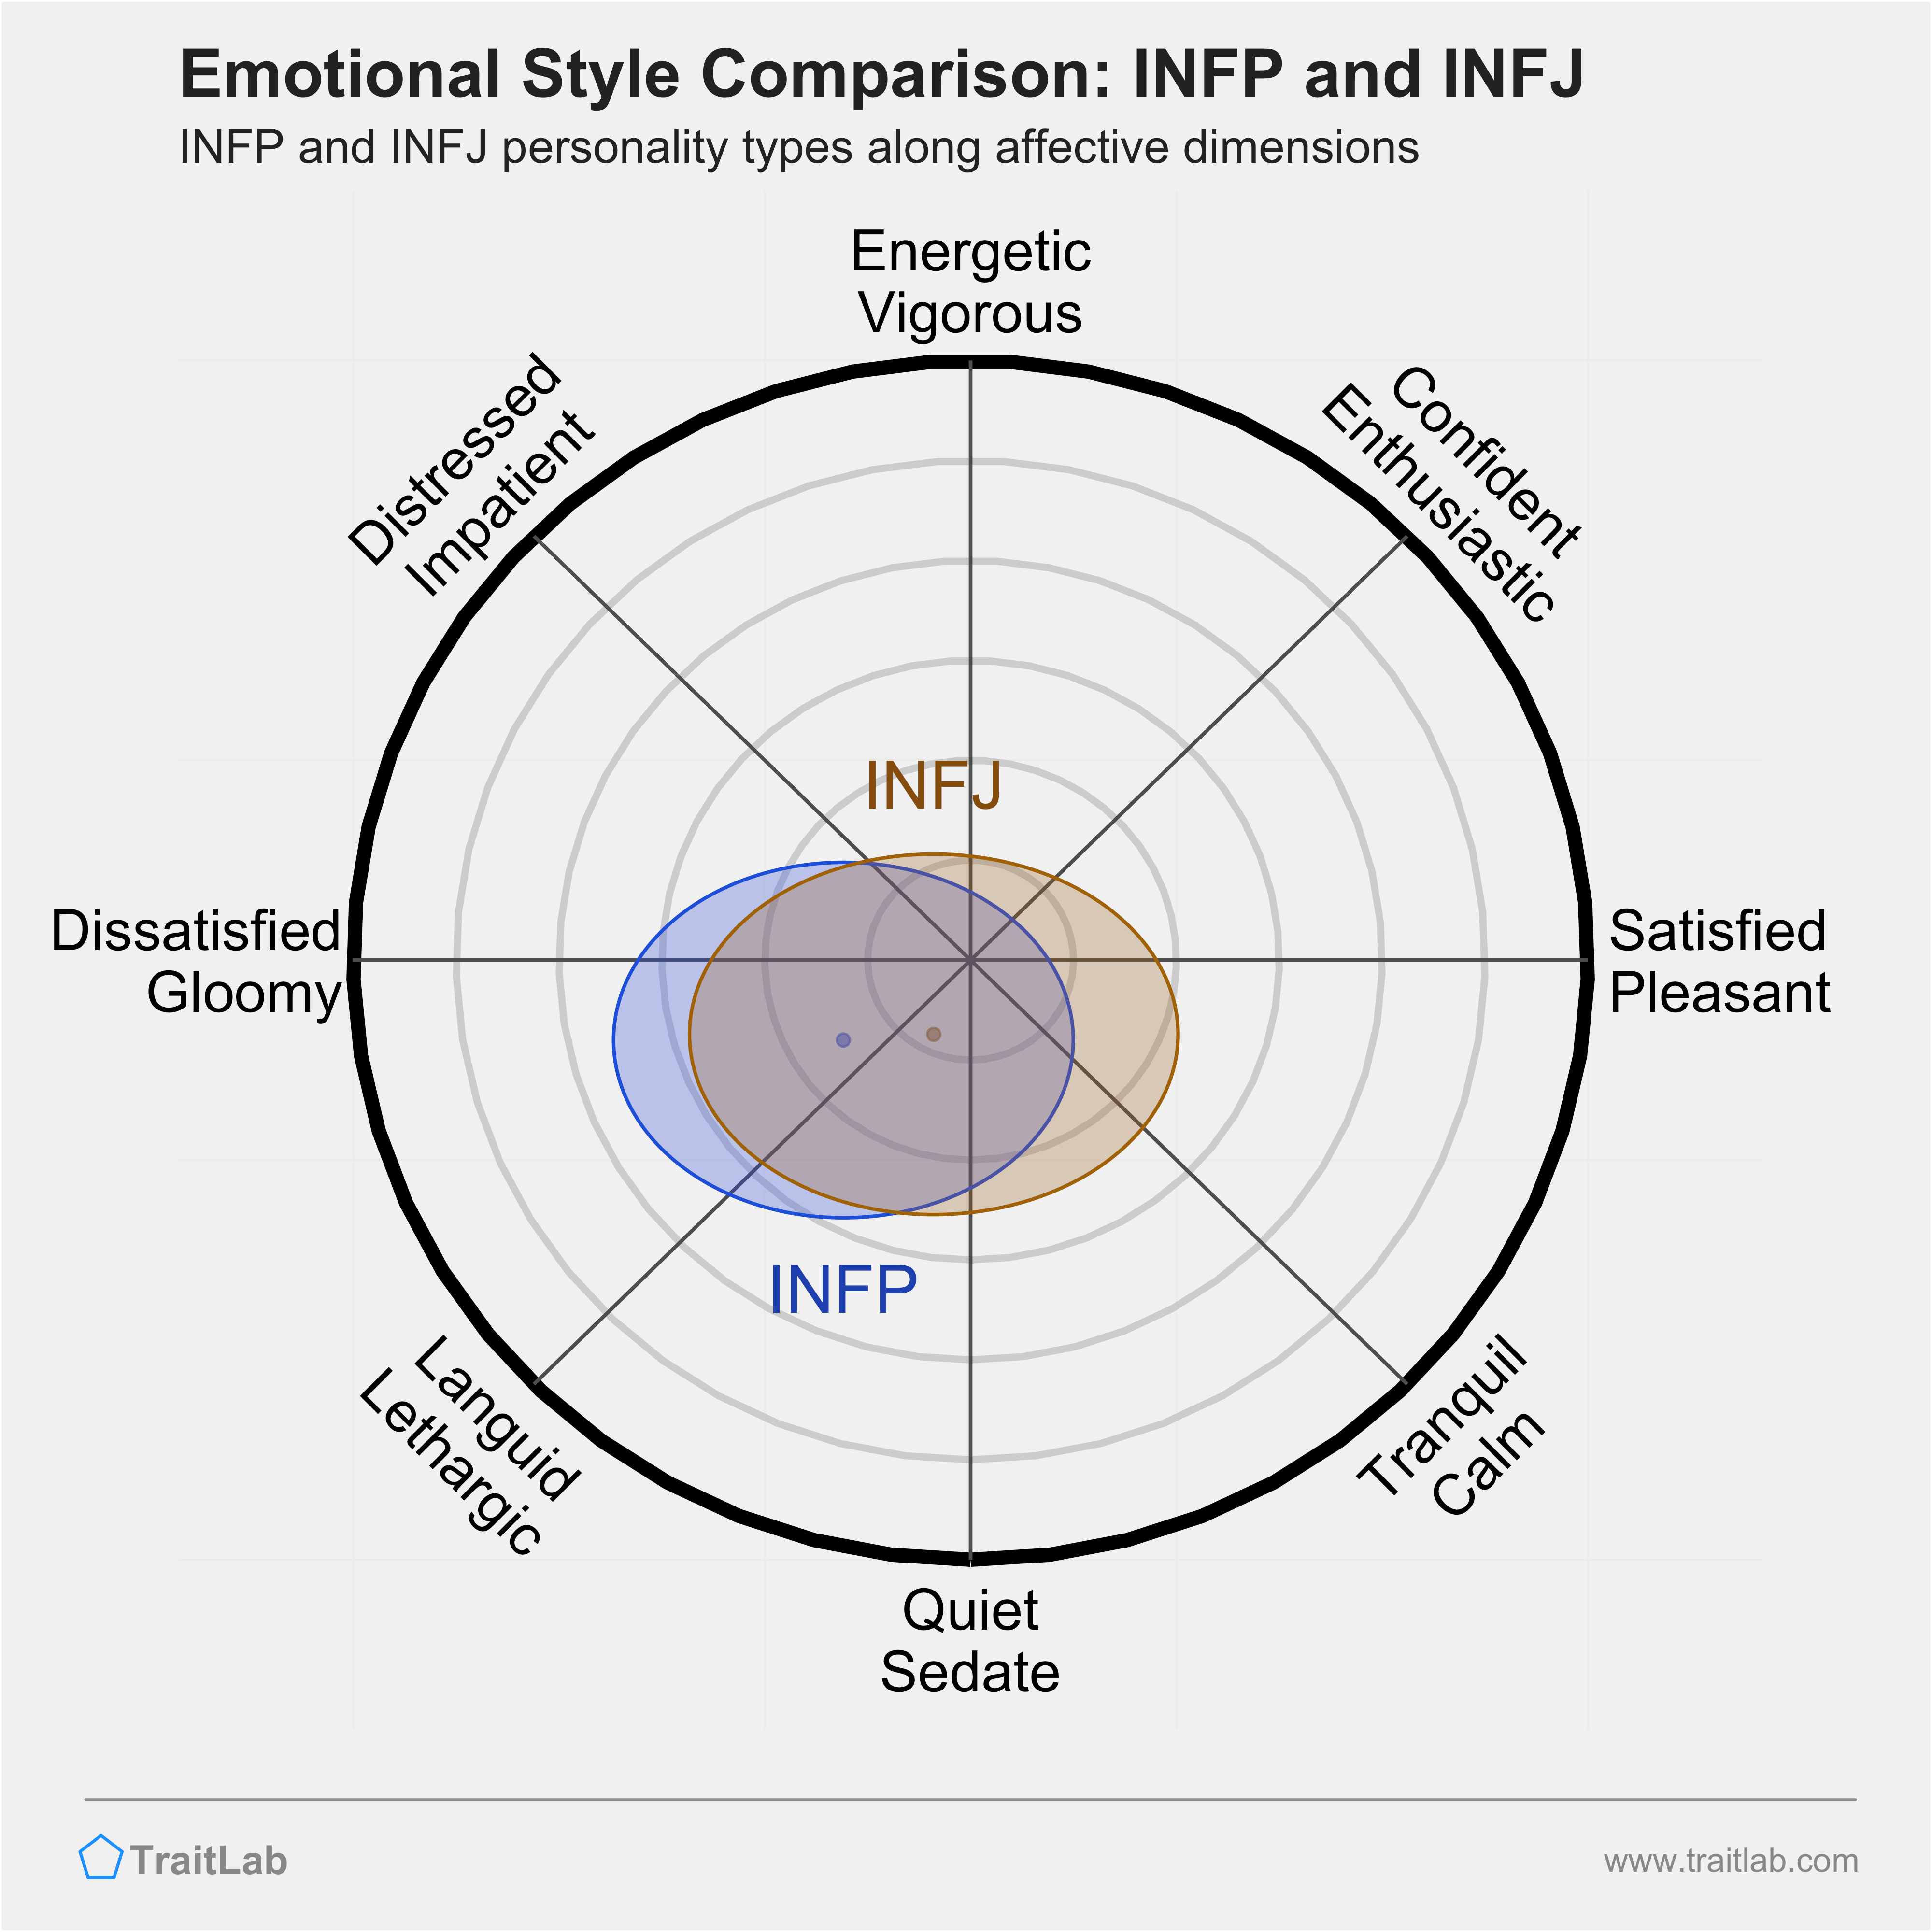 INFP and INFJ comparison across emotional (affective) dimensions